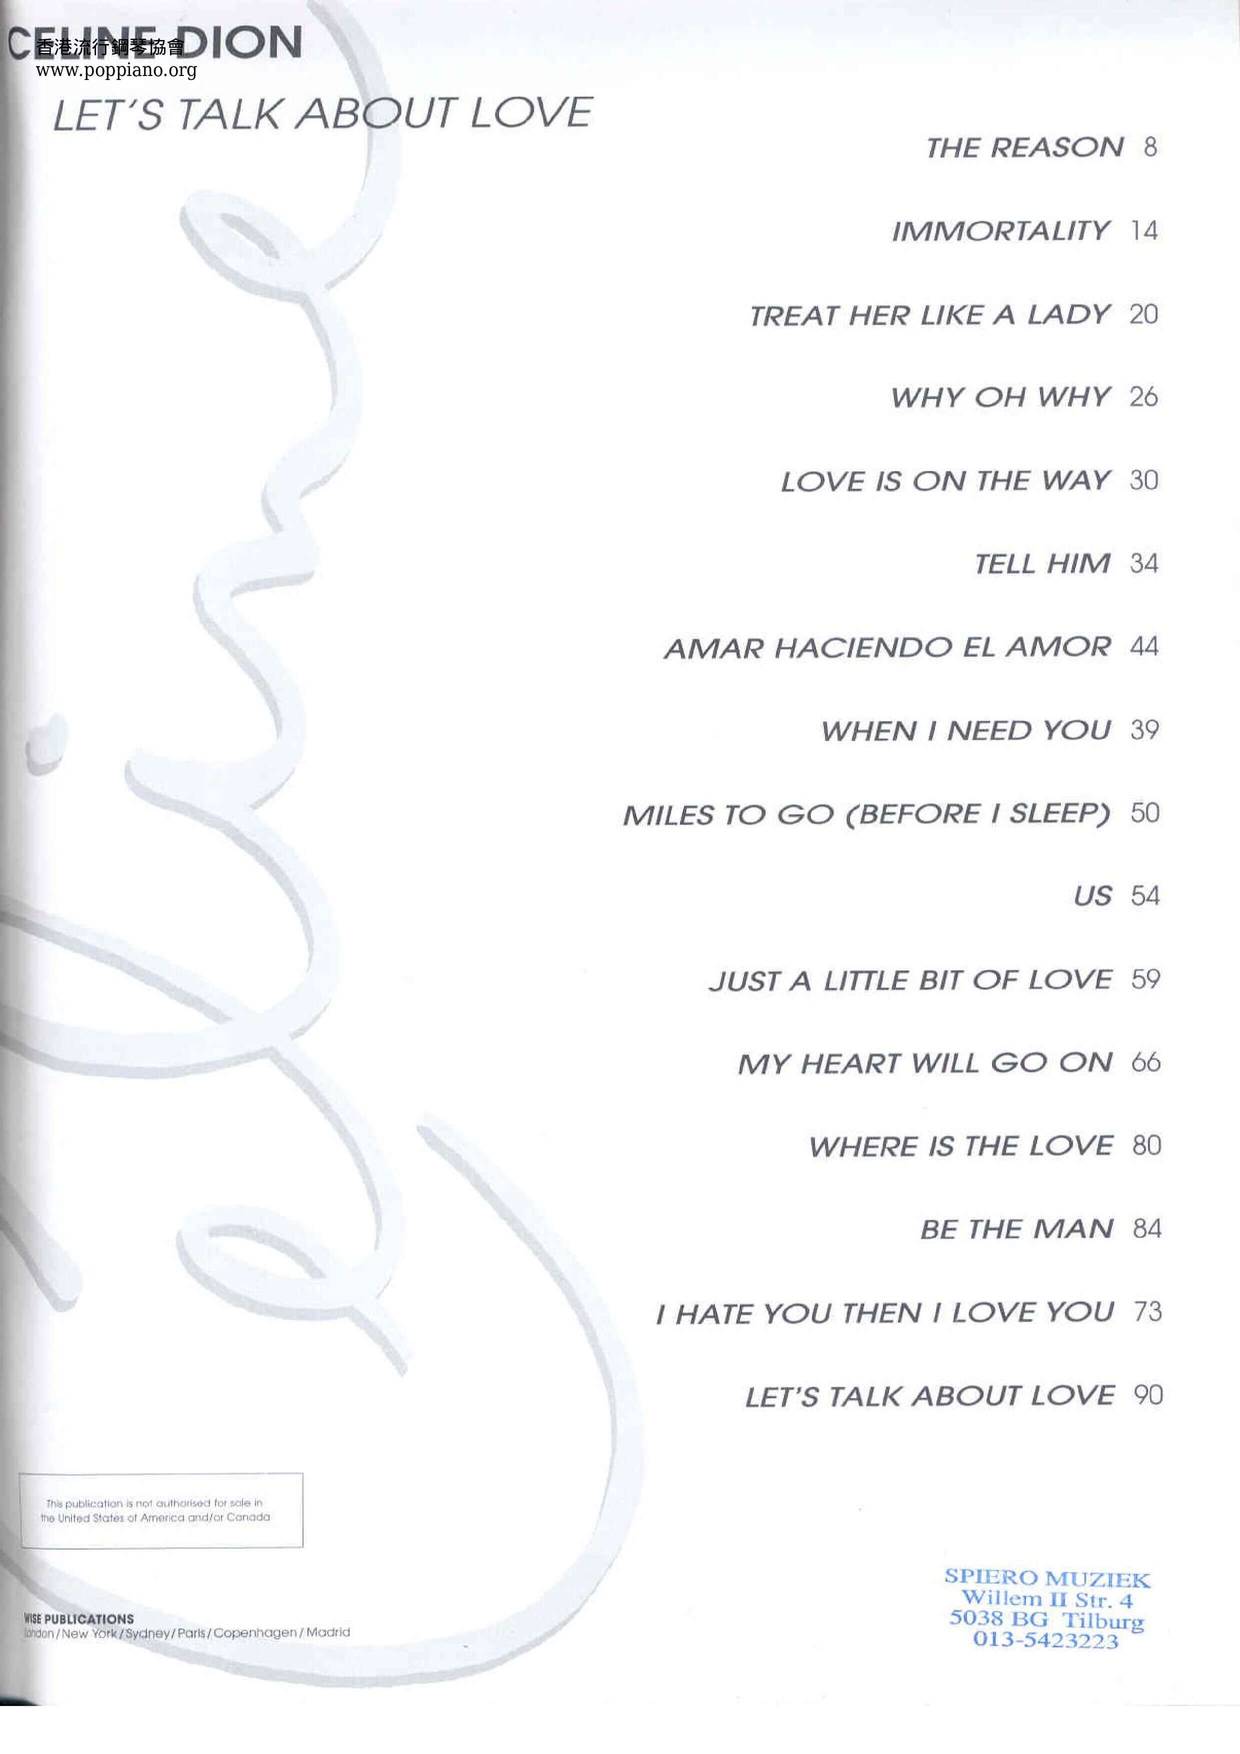 Celine Dion Songbook 90 Pages琴谱